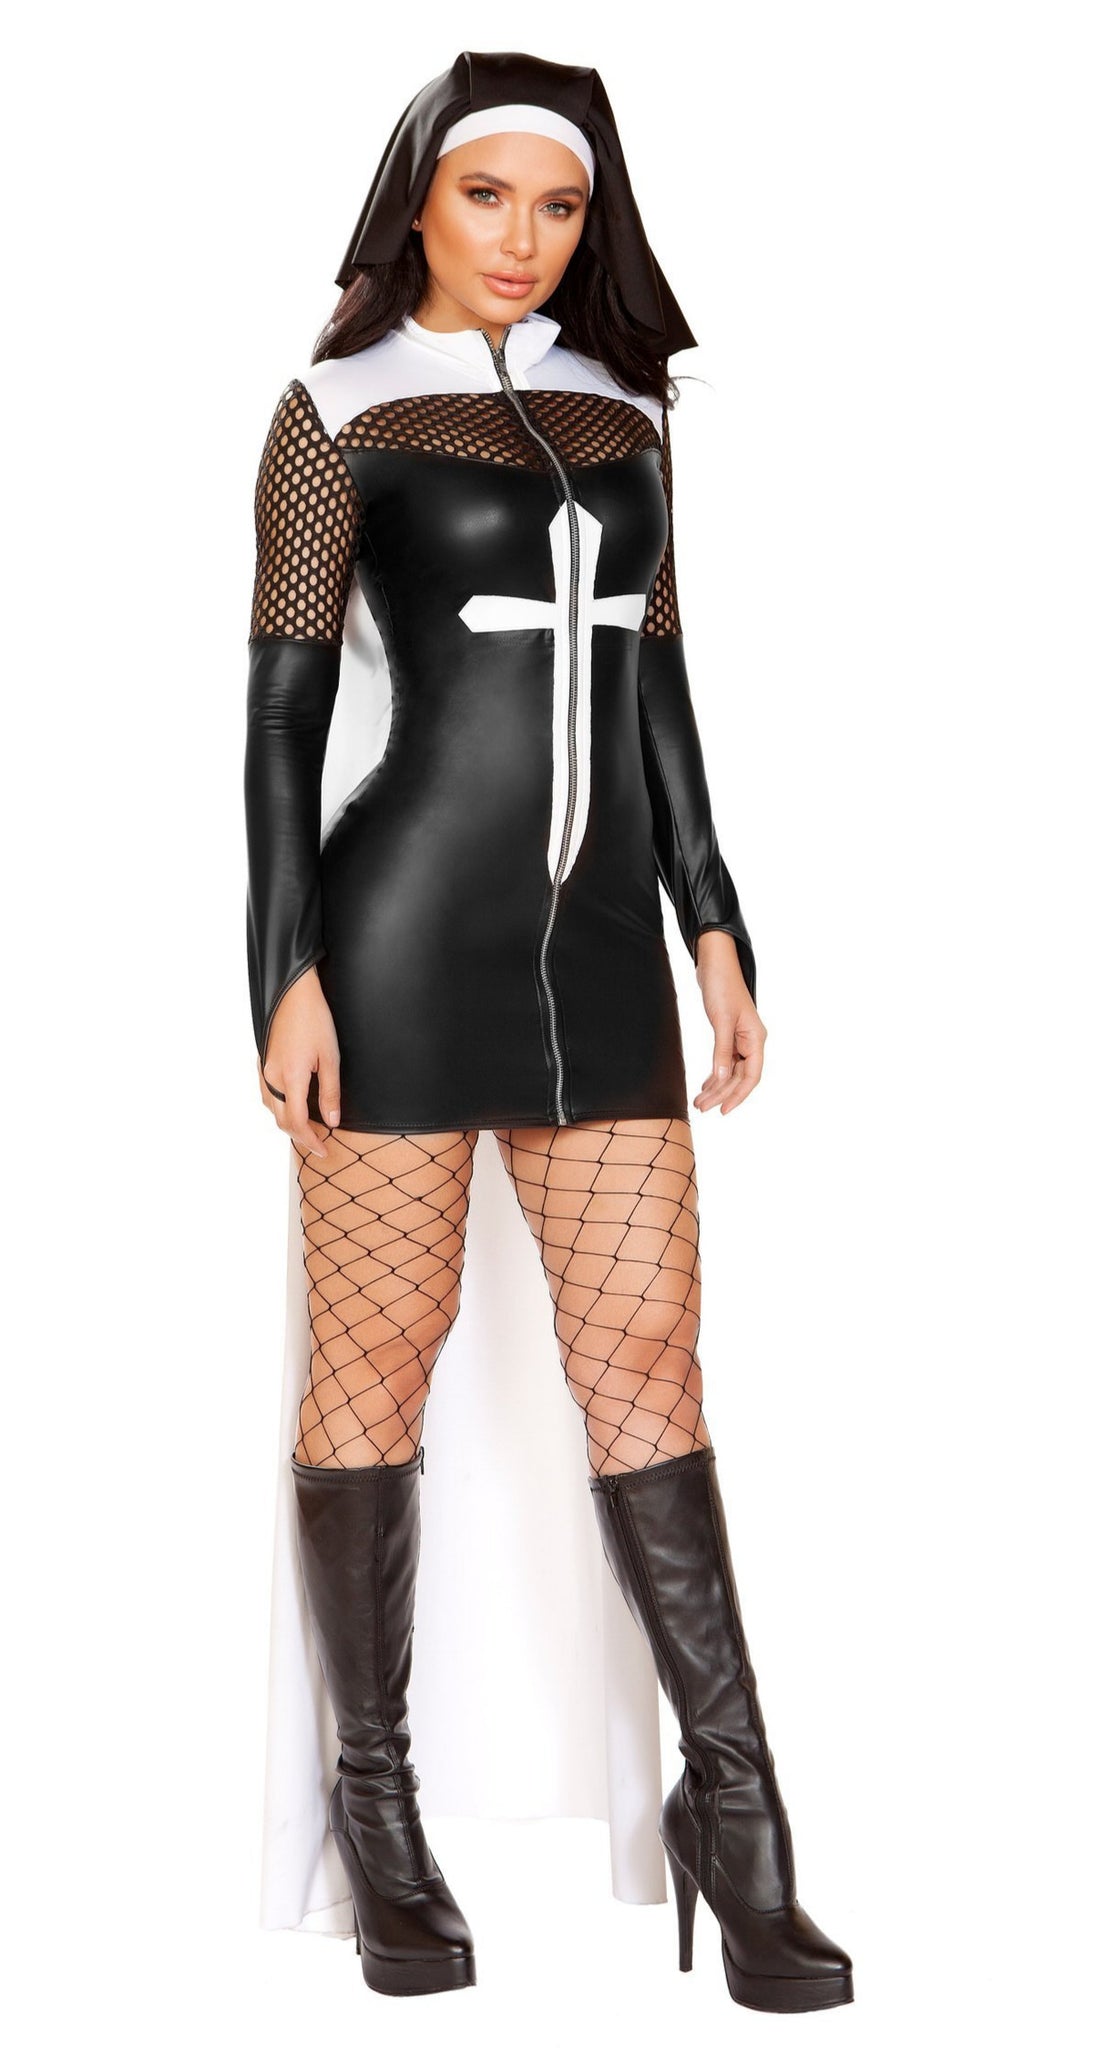 Nun of the Above Costume